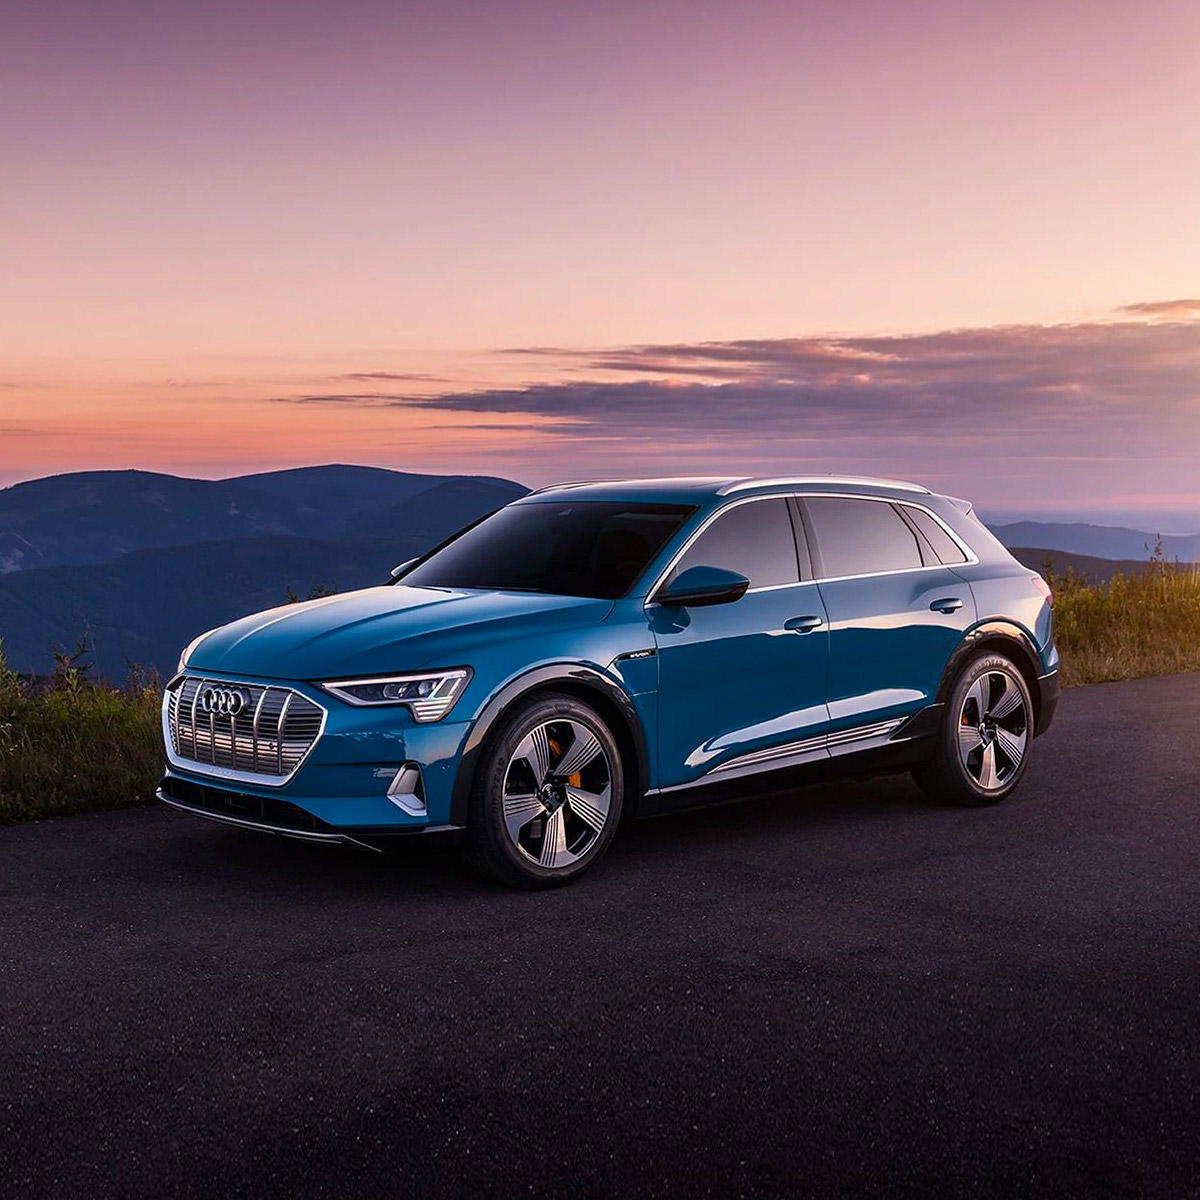 side profile of audi E-tron electric suv in blue color parked on pavement with mountains in the horizon at sunset